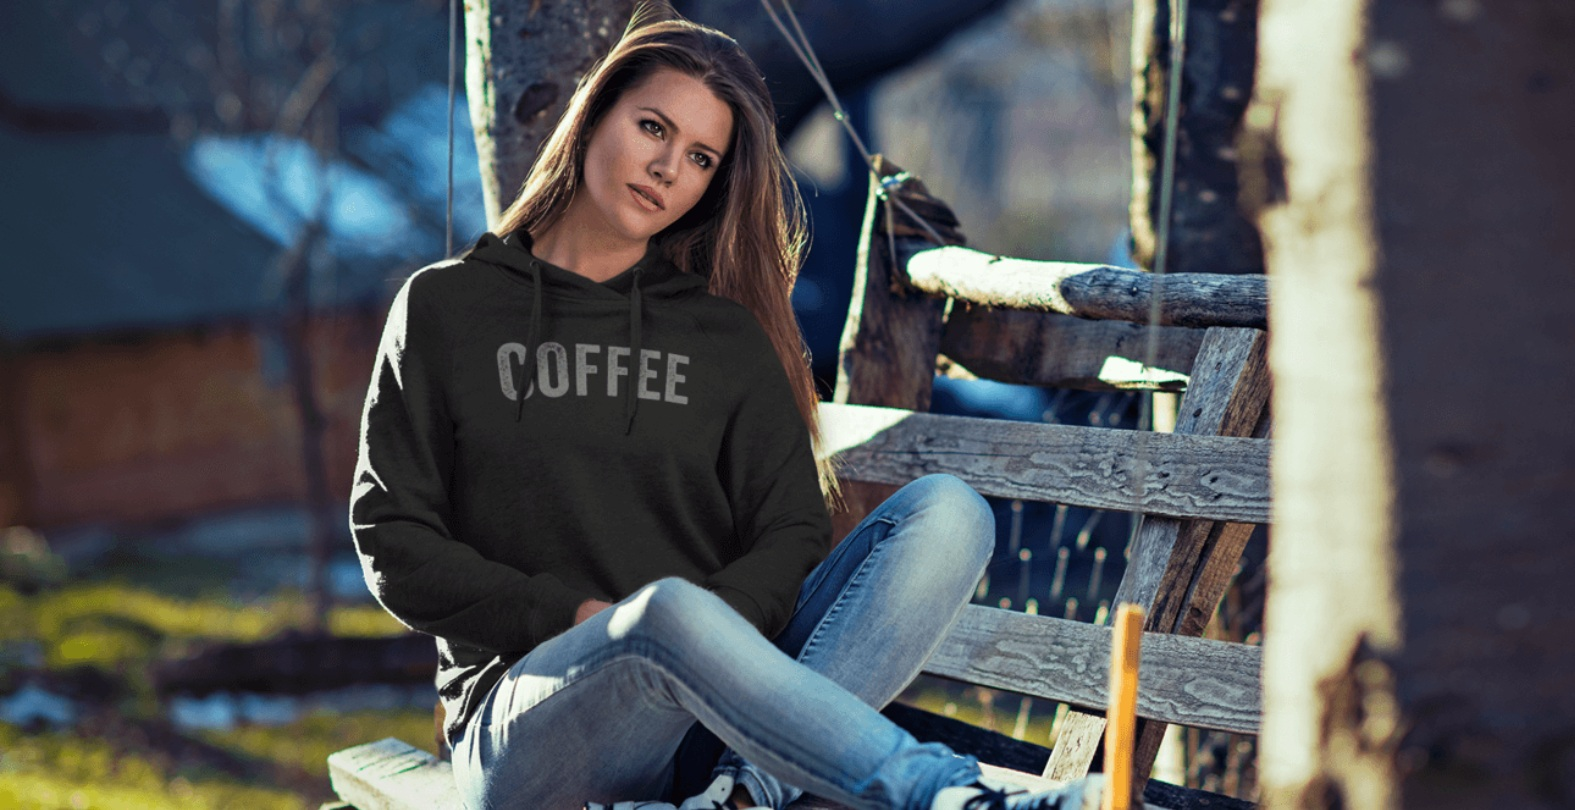 Coffee Hoodie Women's Grey woman sitting on a park bench in the sun